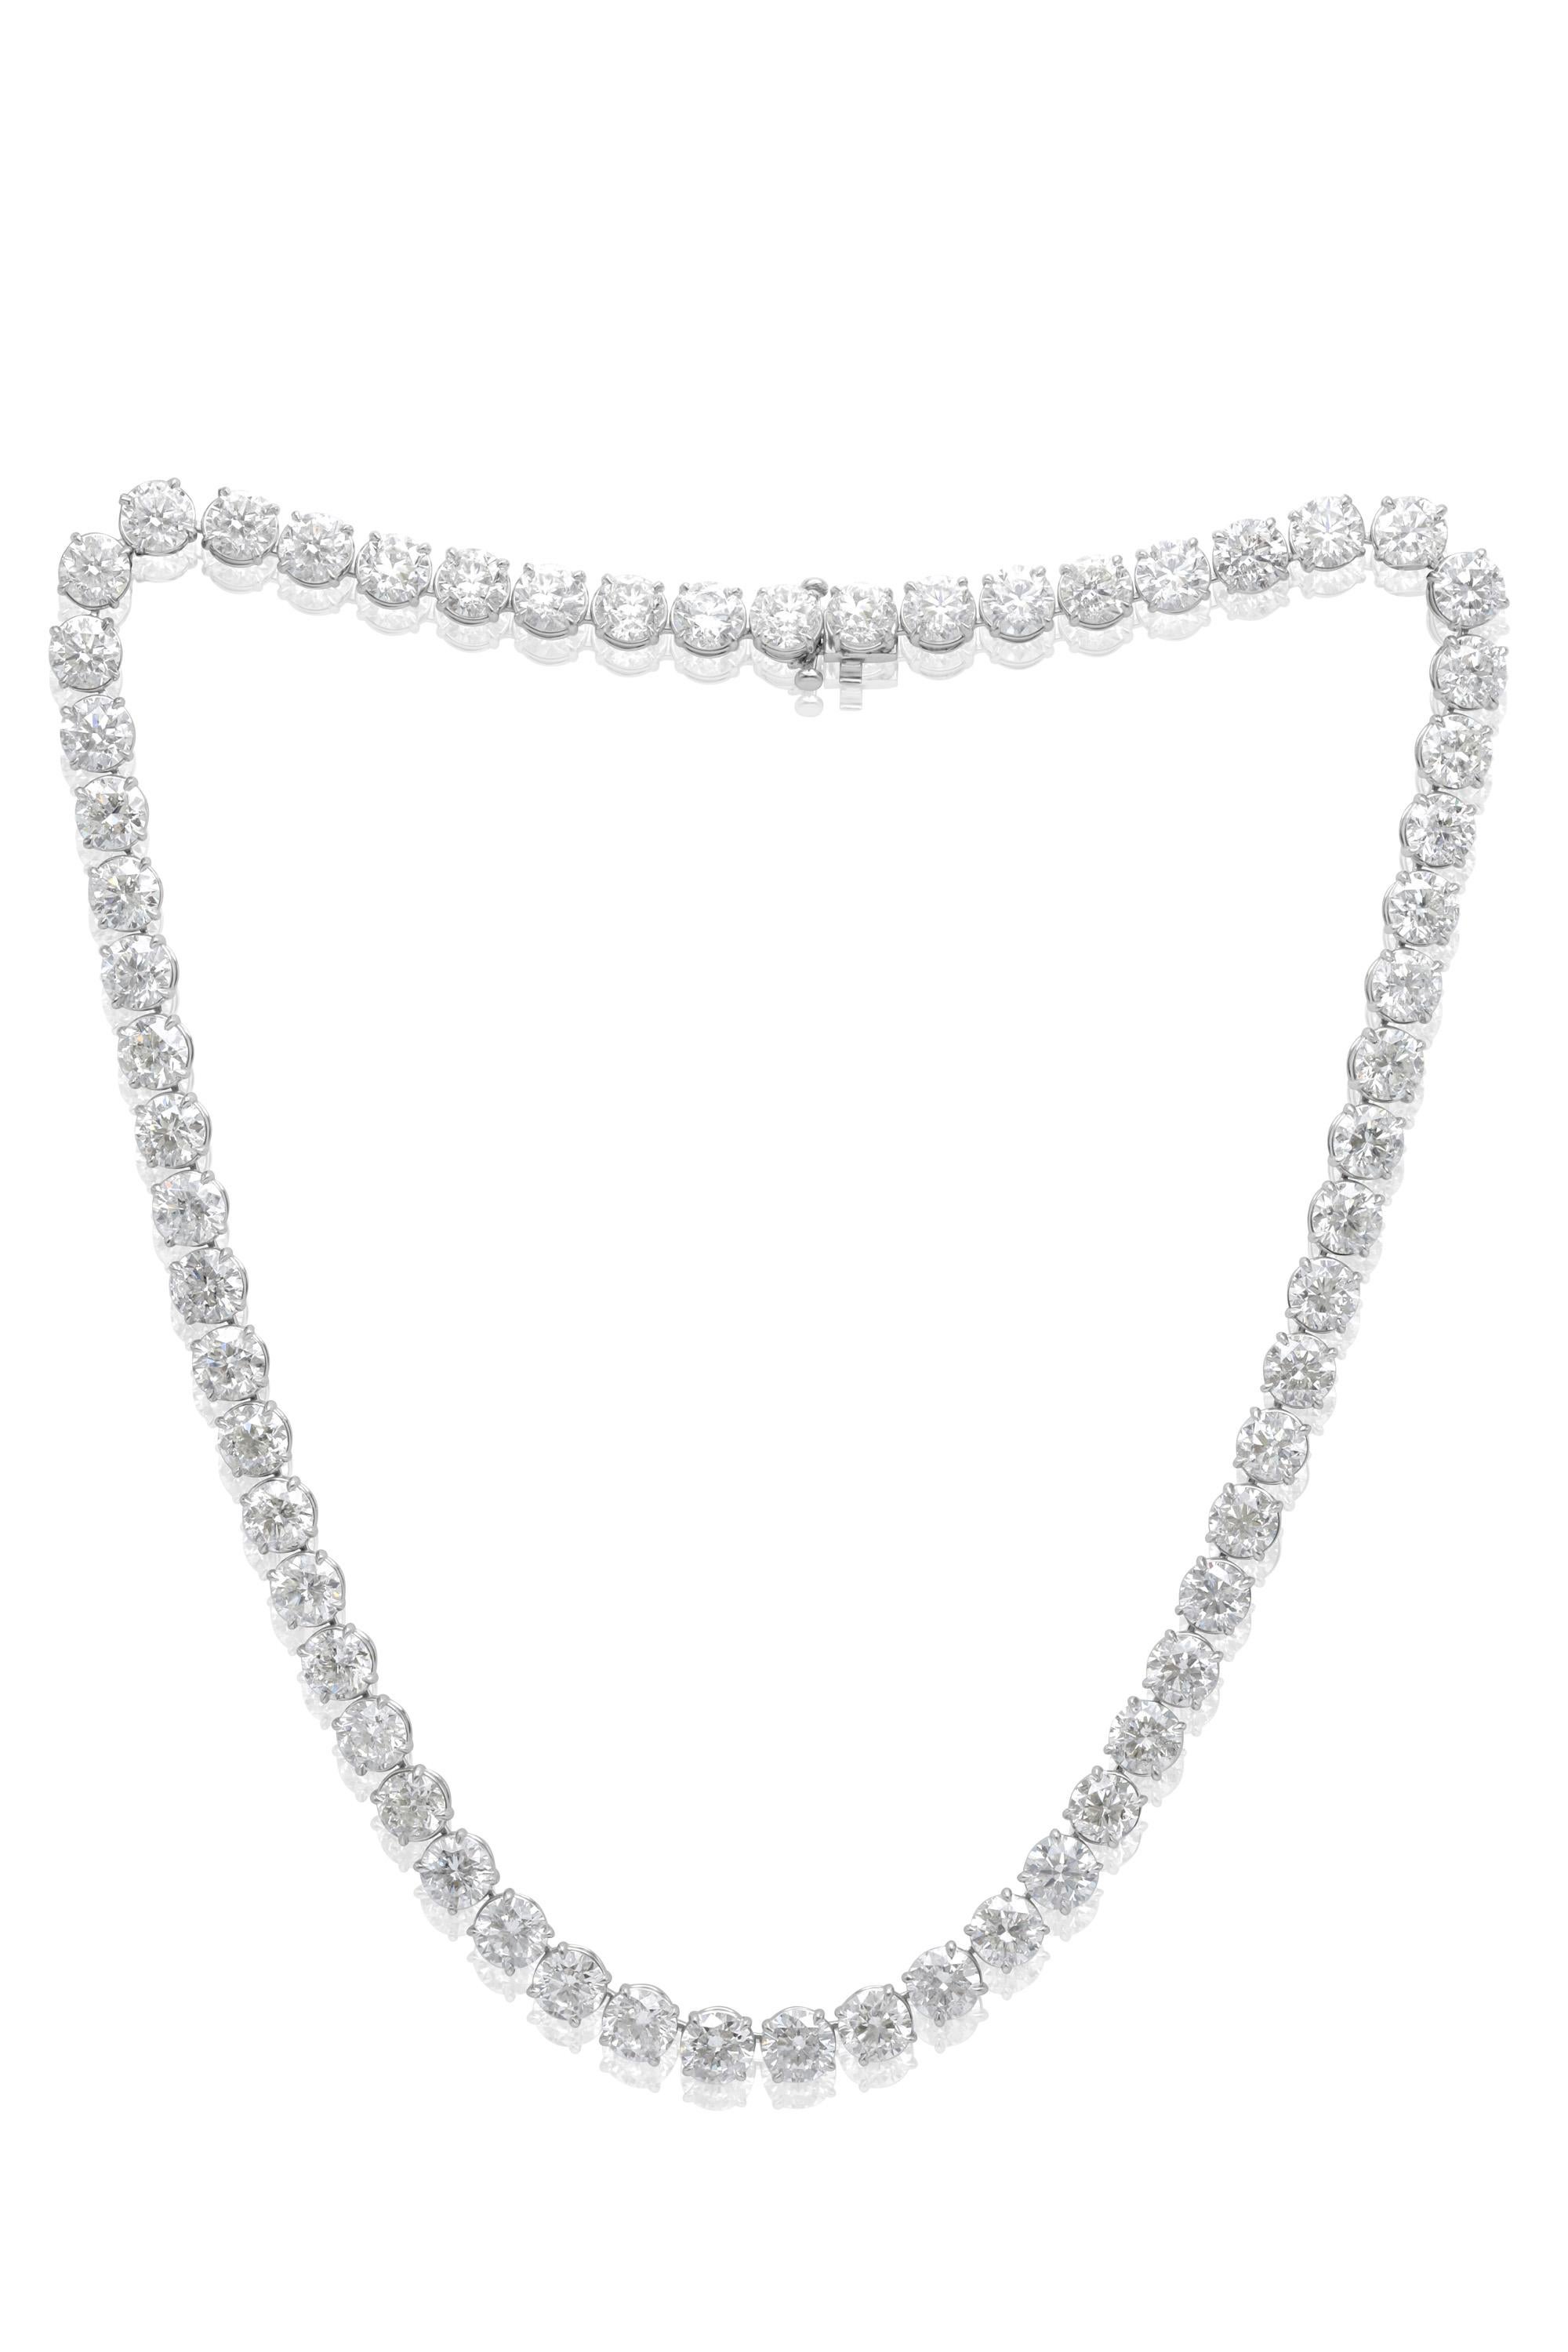 Diana M. Platinum Tennis Necklace Featuring 61.16 cts of Round Diamonds  In New Condition For Sale In New York, NY